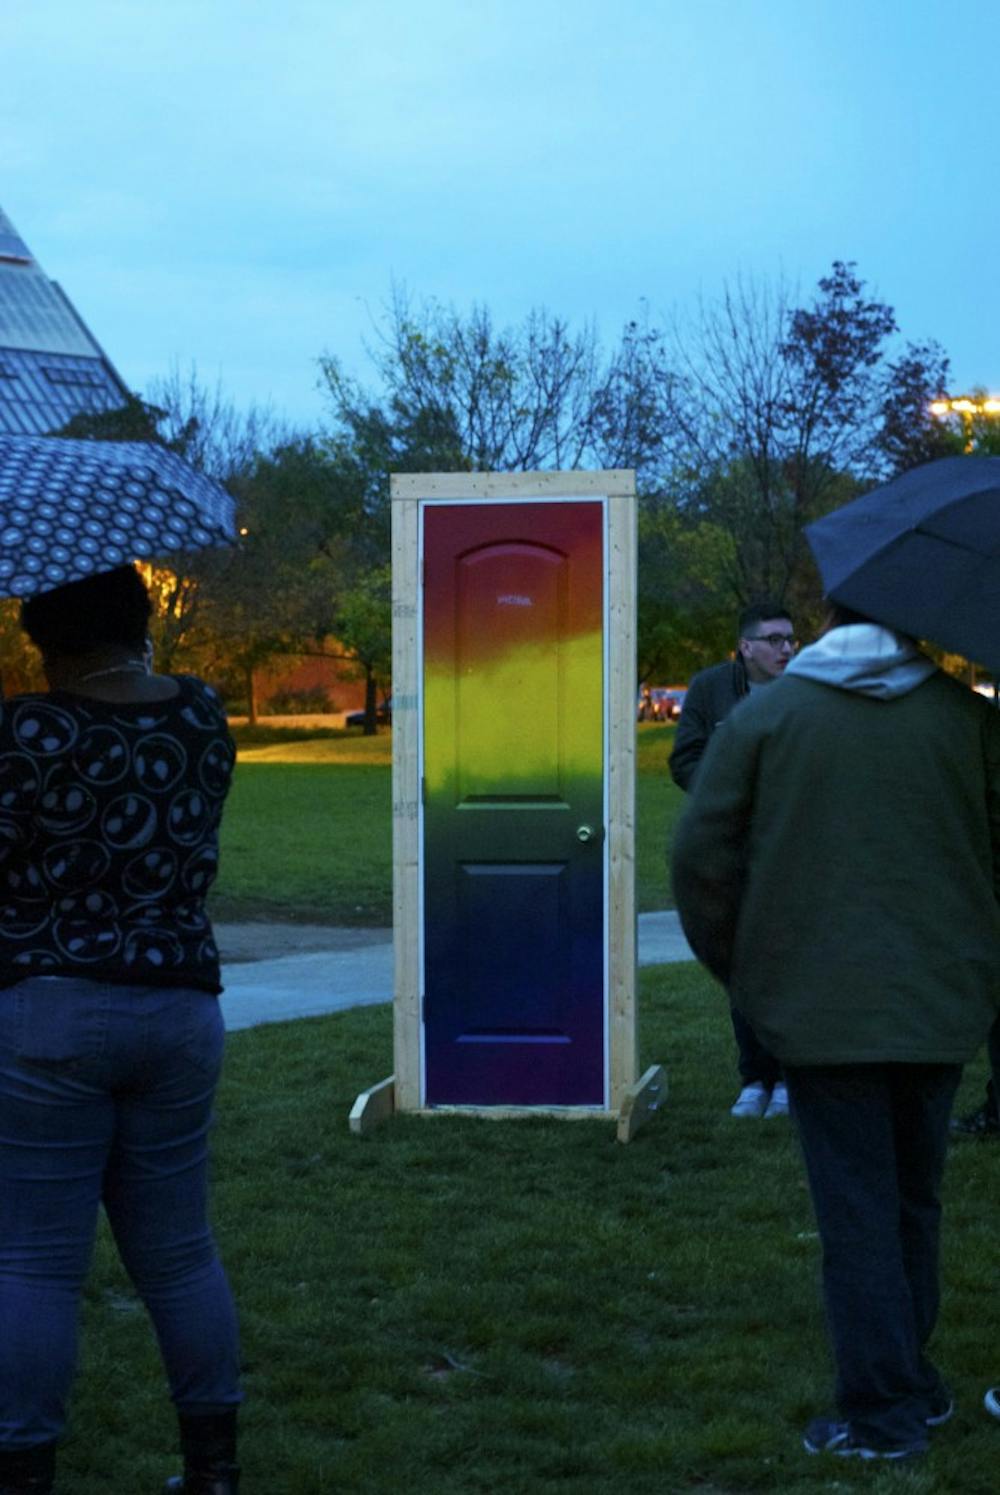 At National Coming Out Day on Oct. 10 on University Green, students would walk through the rainbow-colored door and then tell their personal stories of how they came out to their peers. DN PHOTO SAMANTHA BRAMMER